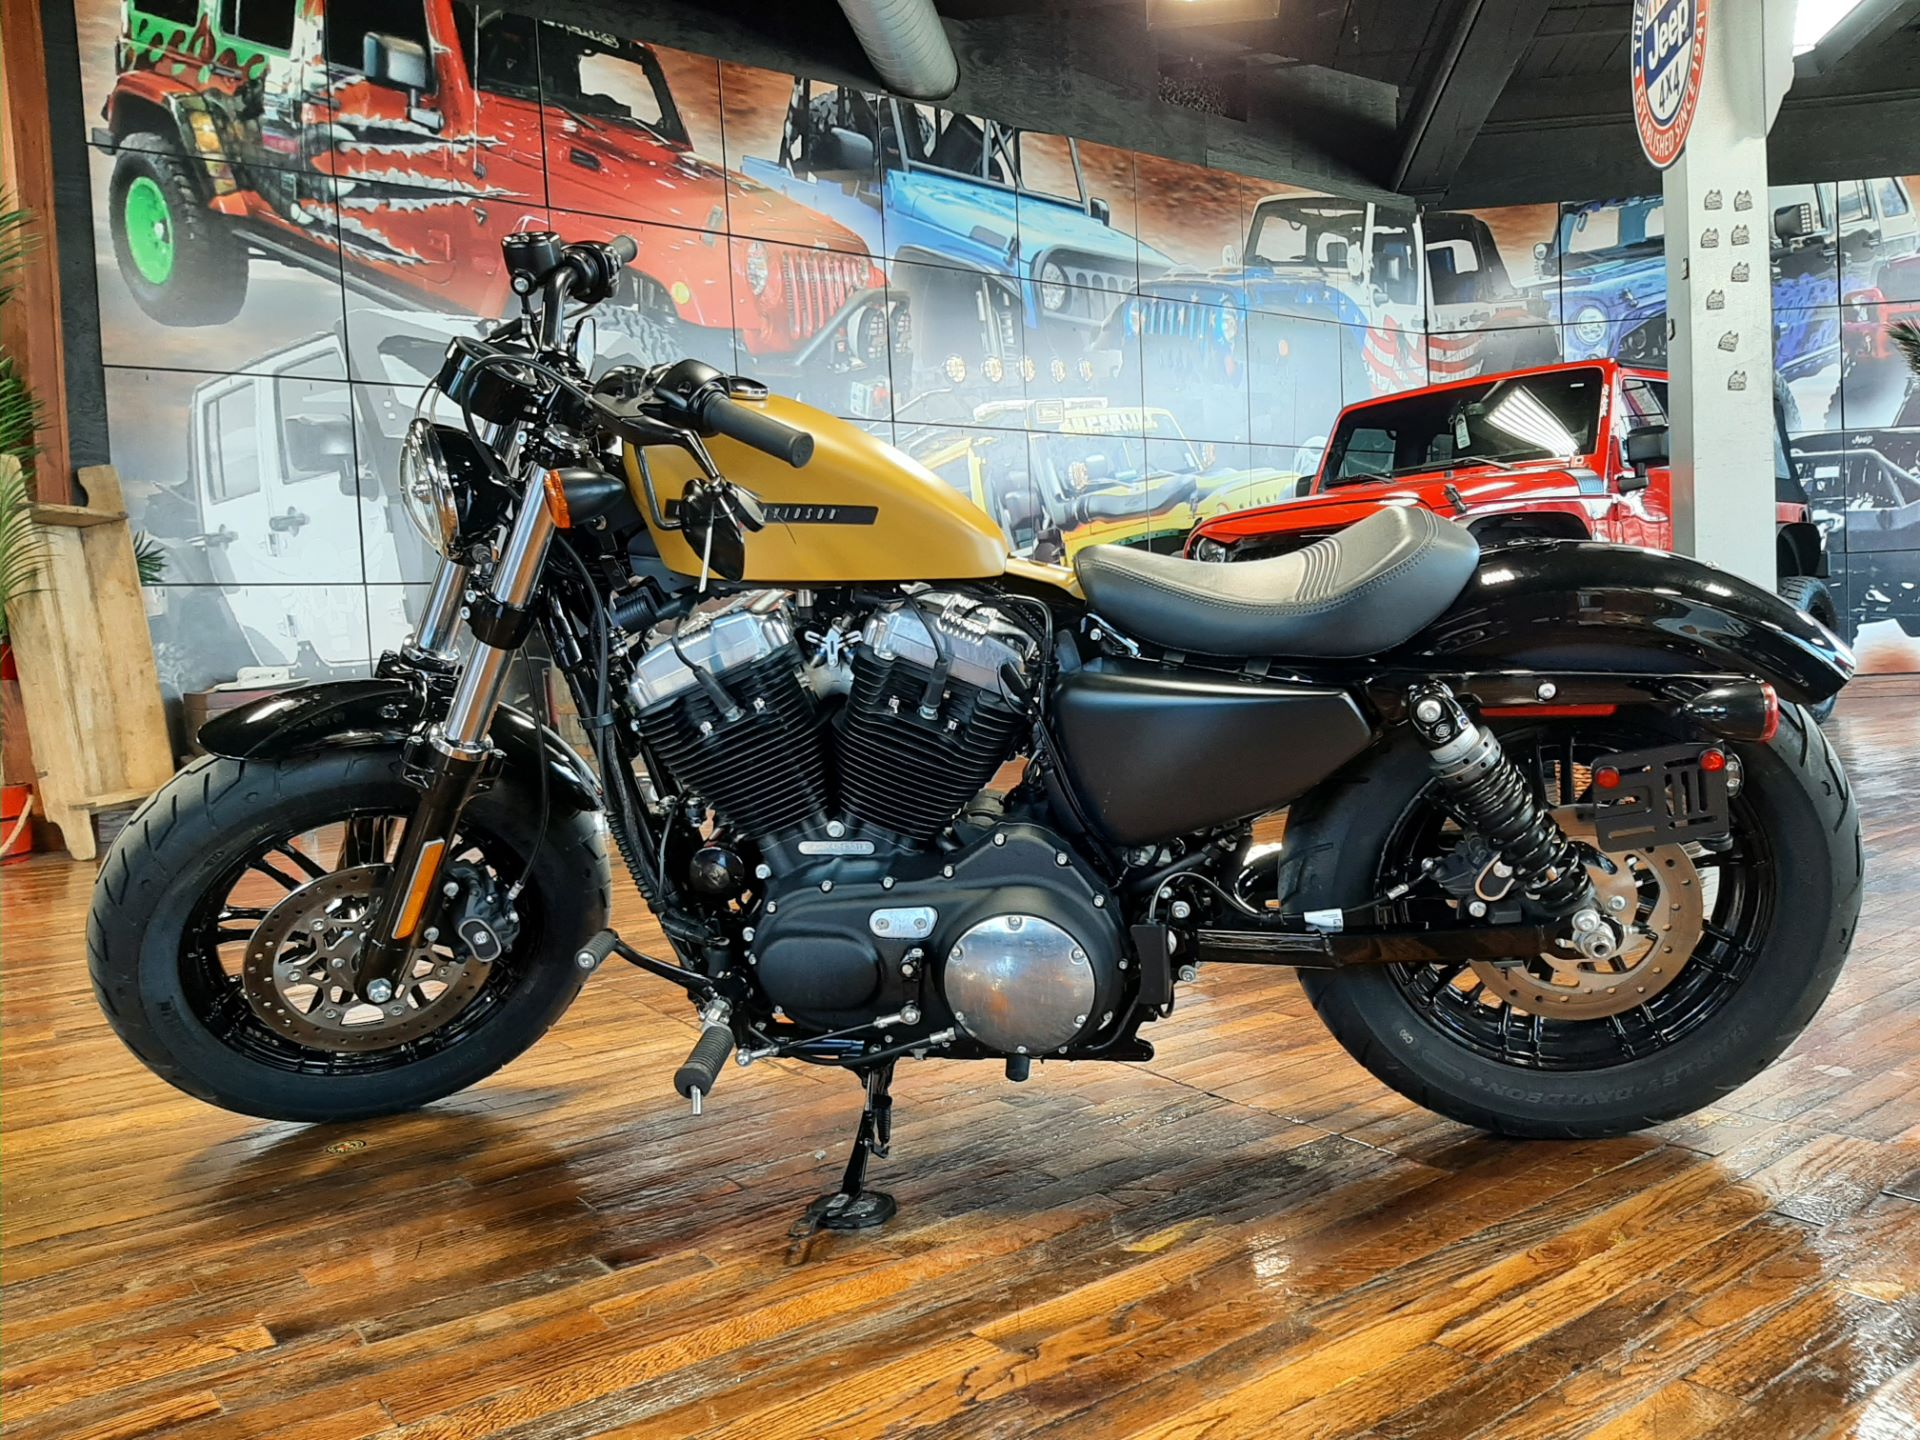 Used 2019 Harley Davidson Forty Eight Motorcycles In Laurel Ms Ms Lul 0751 4301 Rugged Gold Denim